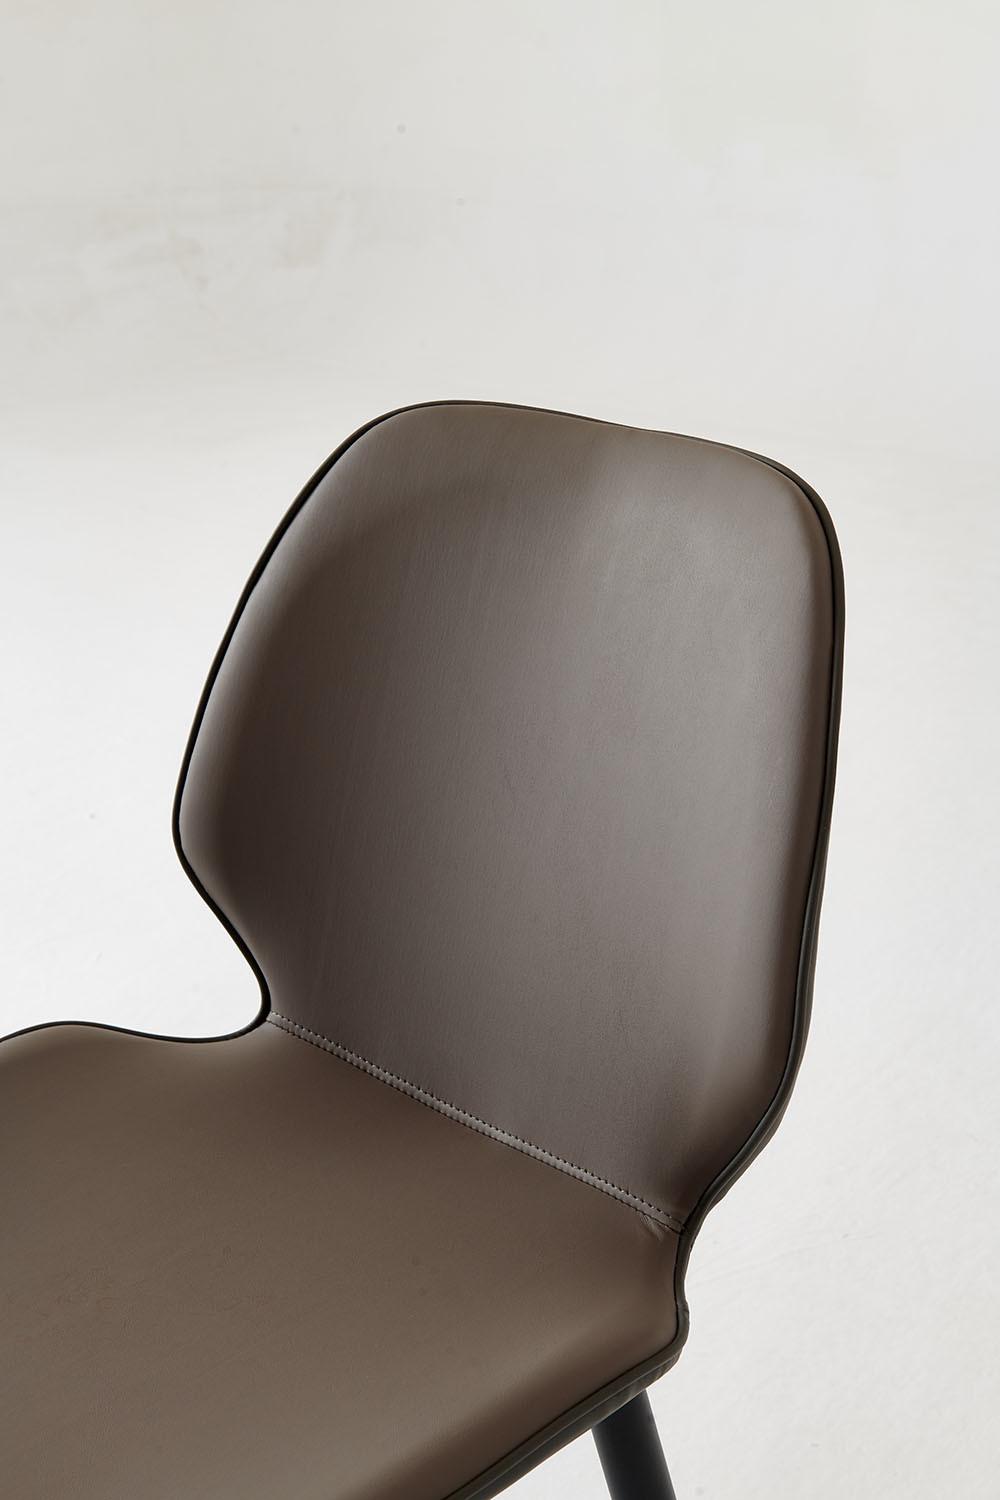 Hotel Restaurant Office Furniture Indoor Brown Dining Chair